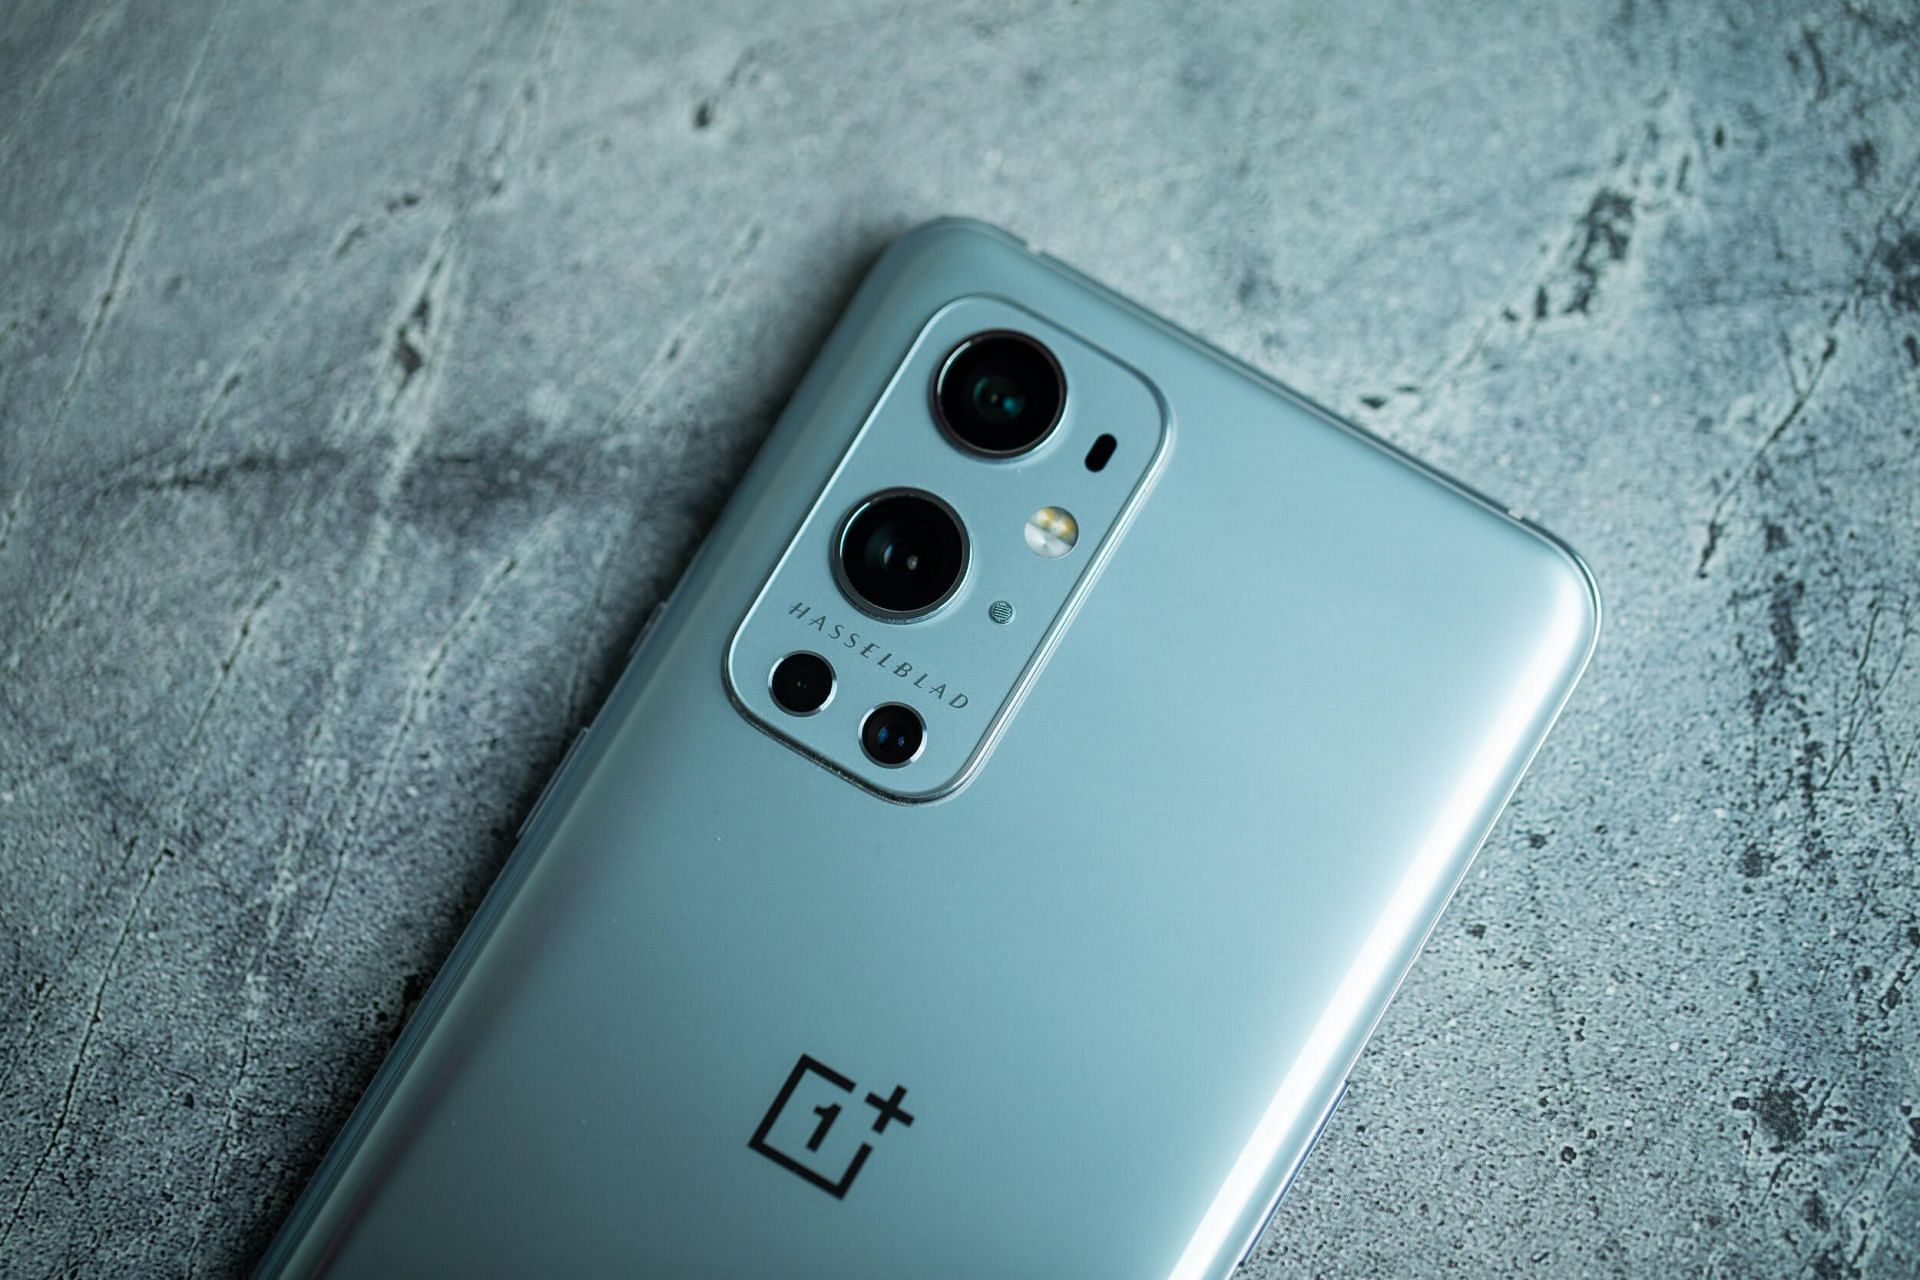 Amazing Android phones like the OnePlus 9 Pro doesn&#039;t come with a standard headphone jack (Image via DigitalTrends)